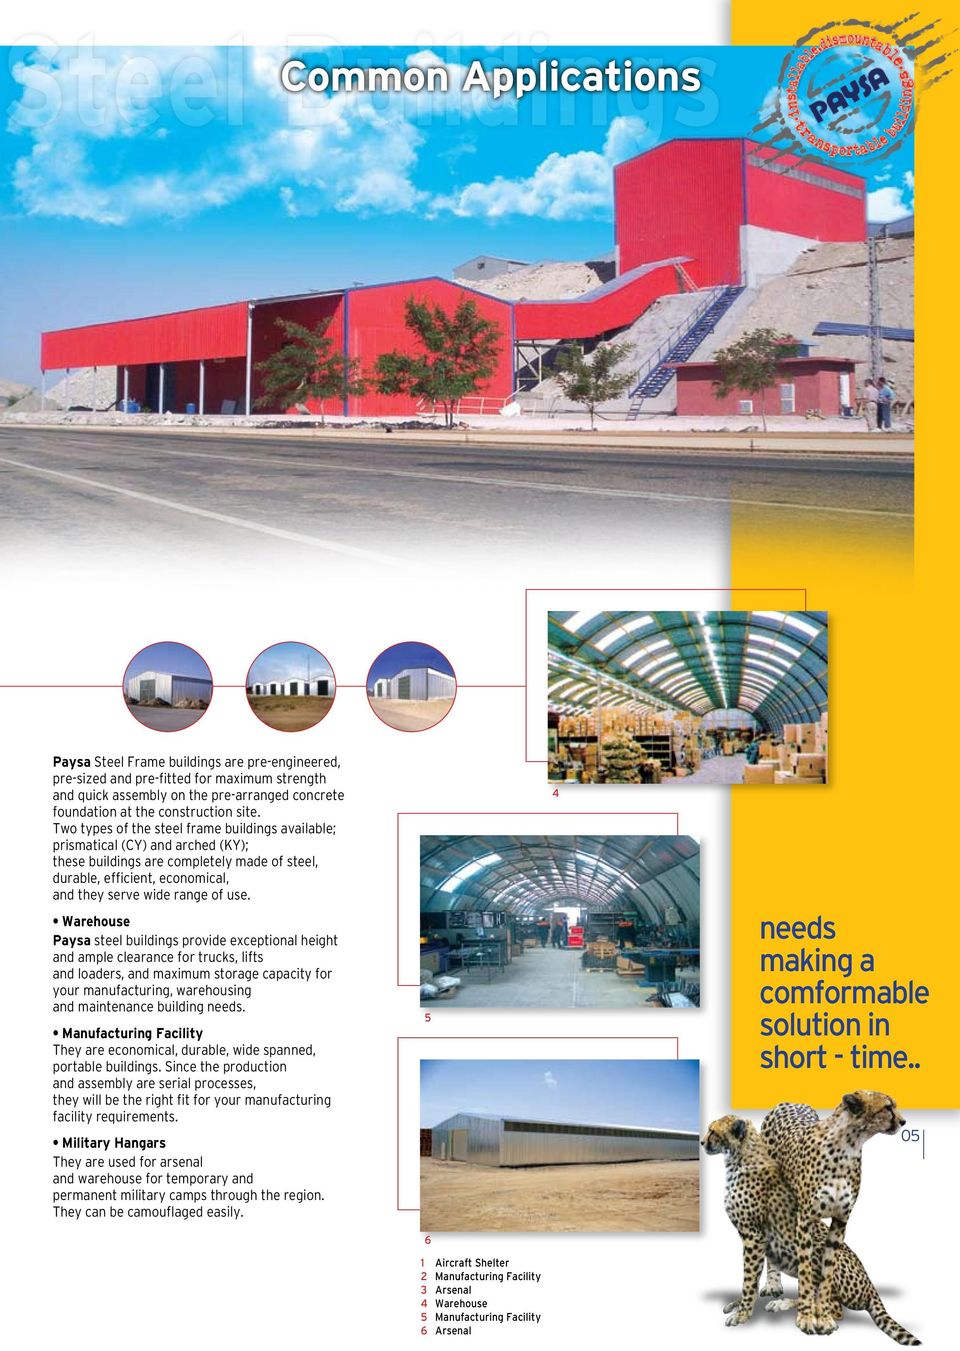 Two types of the steel frame buildings available; prismatical (CY) and arched (KY); these buildings are completely made of steel, durable, efficient, economical, and they serve wide range of use.